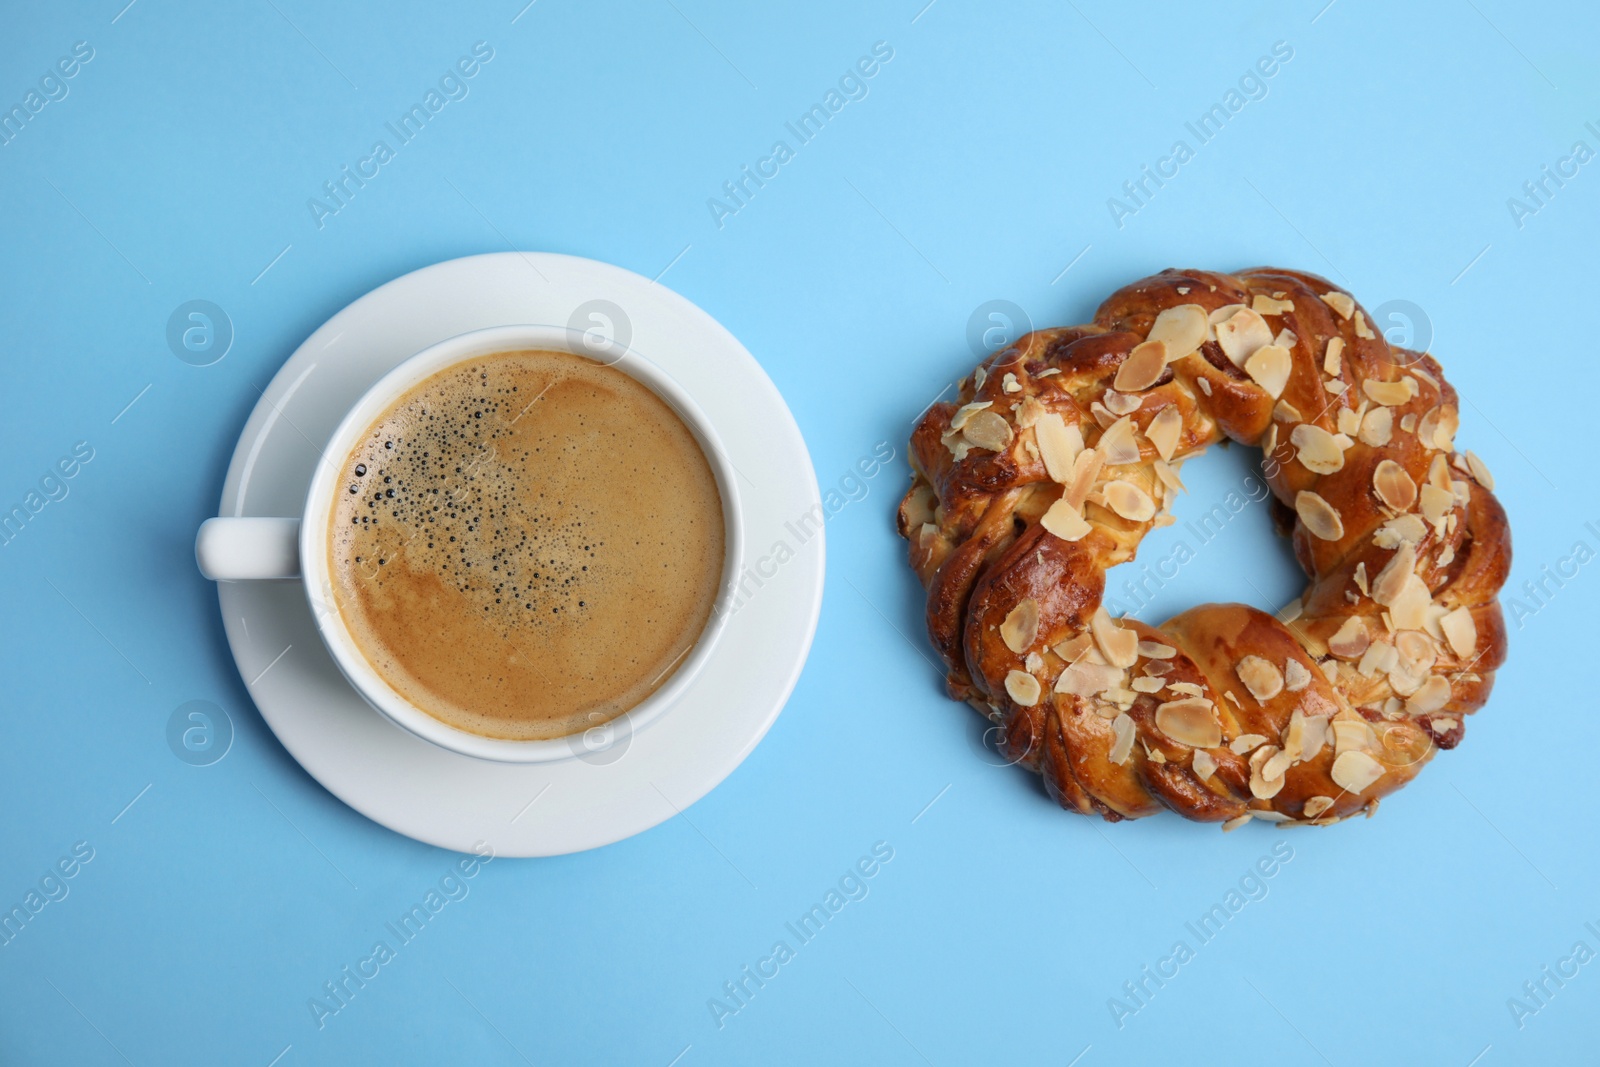 Photo of Delicious coffee and pastry on light blue background, flat lay